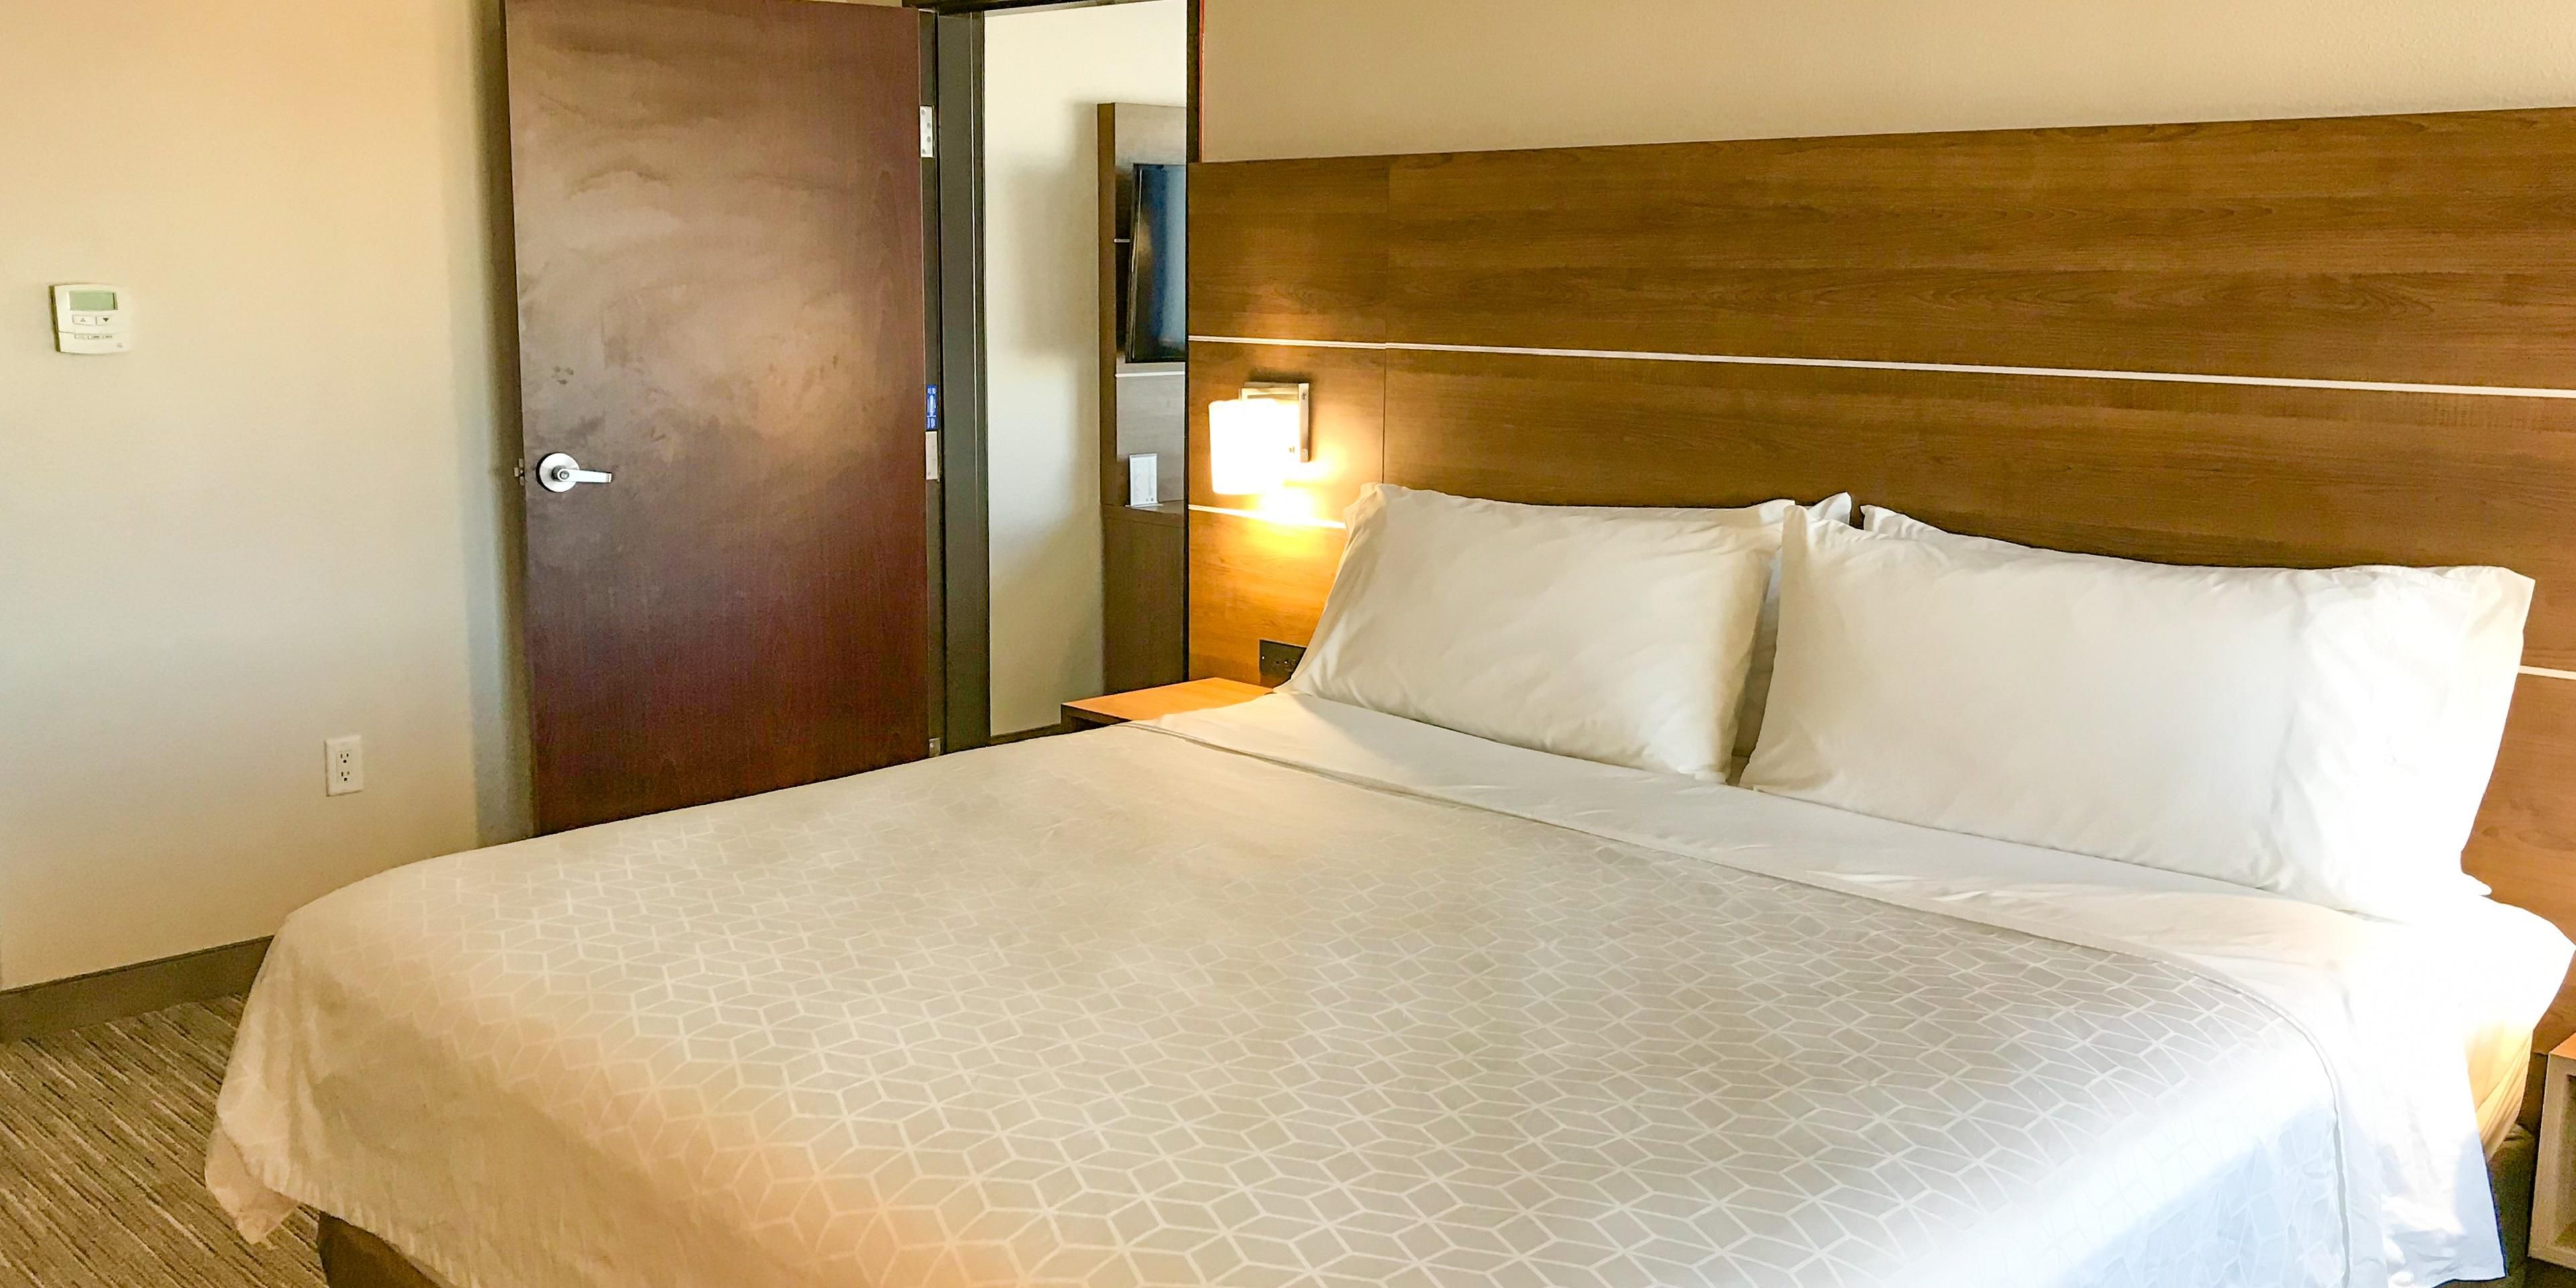 Come check out our new kids suite. This two room suite offers one queen and one king, small living area and a single bathroom. Plenty of room for a small traveling family.